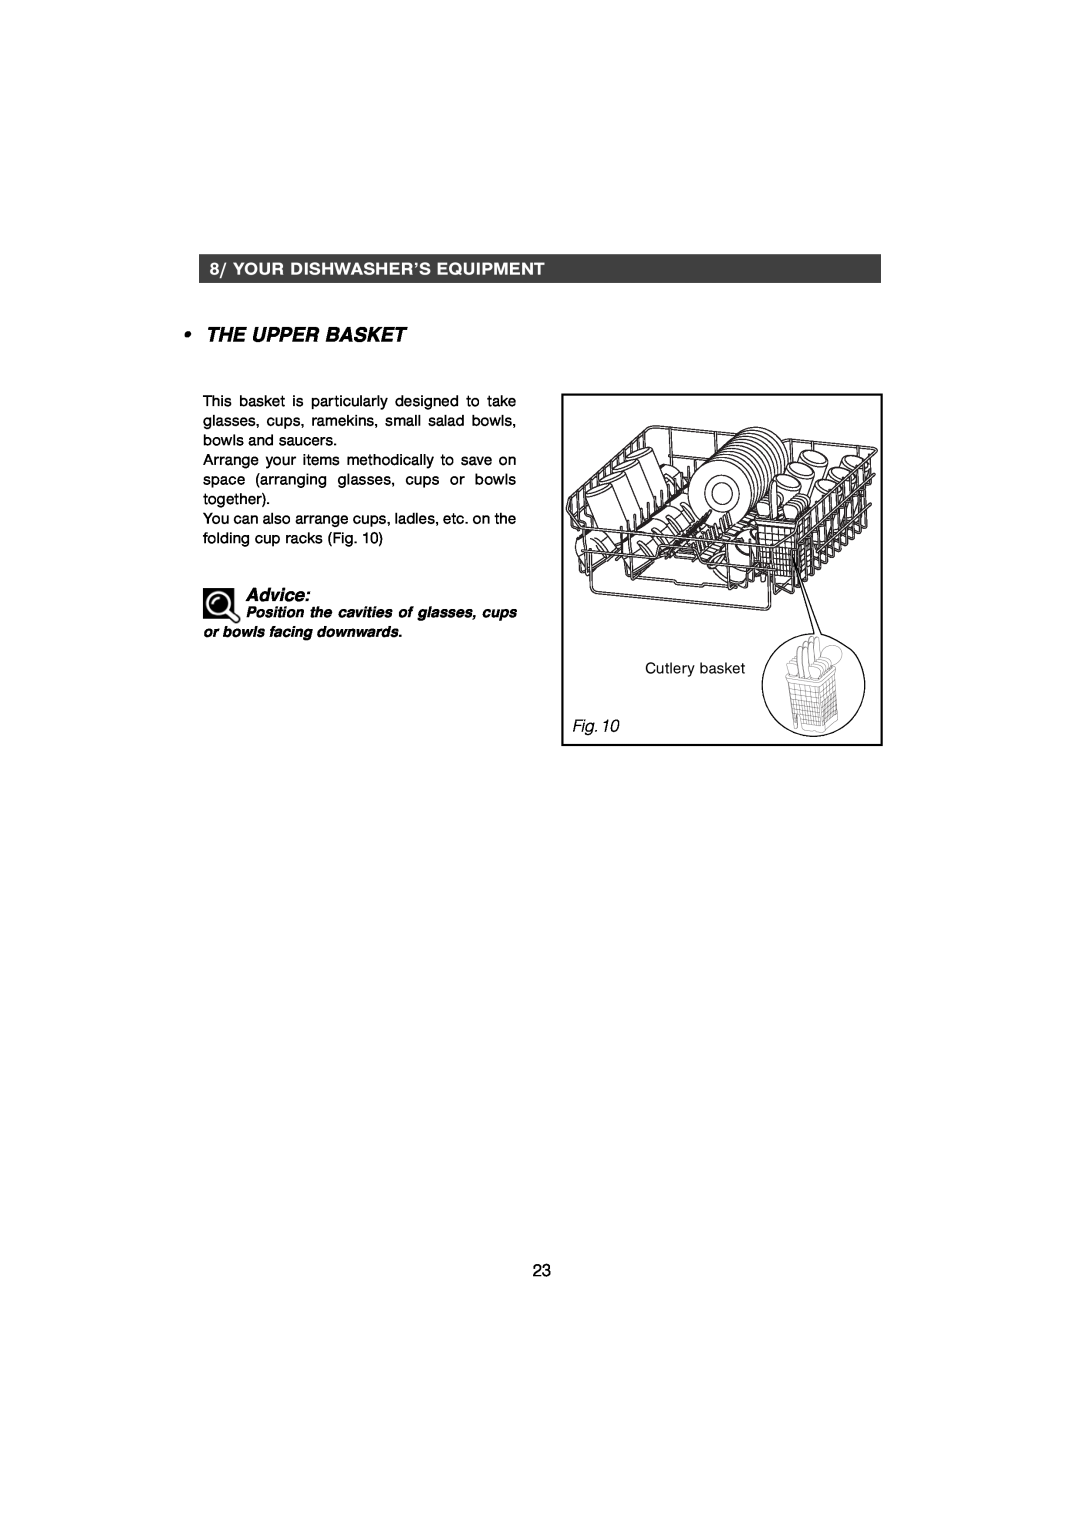 CDA WF250SS manual The Upper Basket, Advice, 8/ YOUR DISHWASHER’S EQUIPMENT 